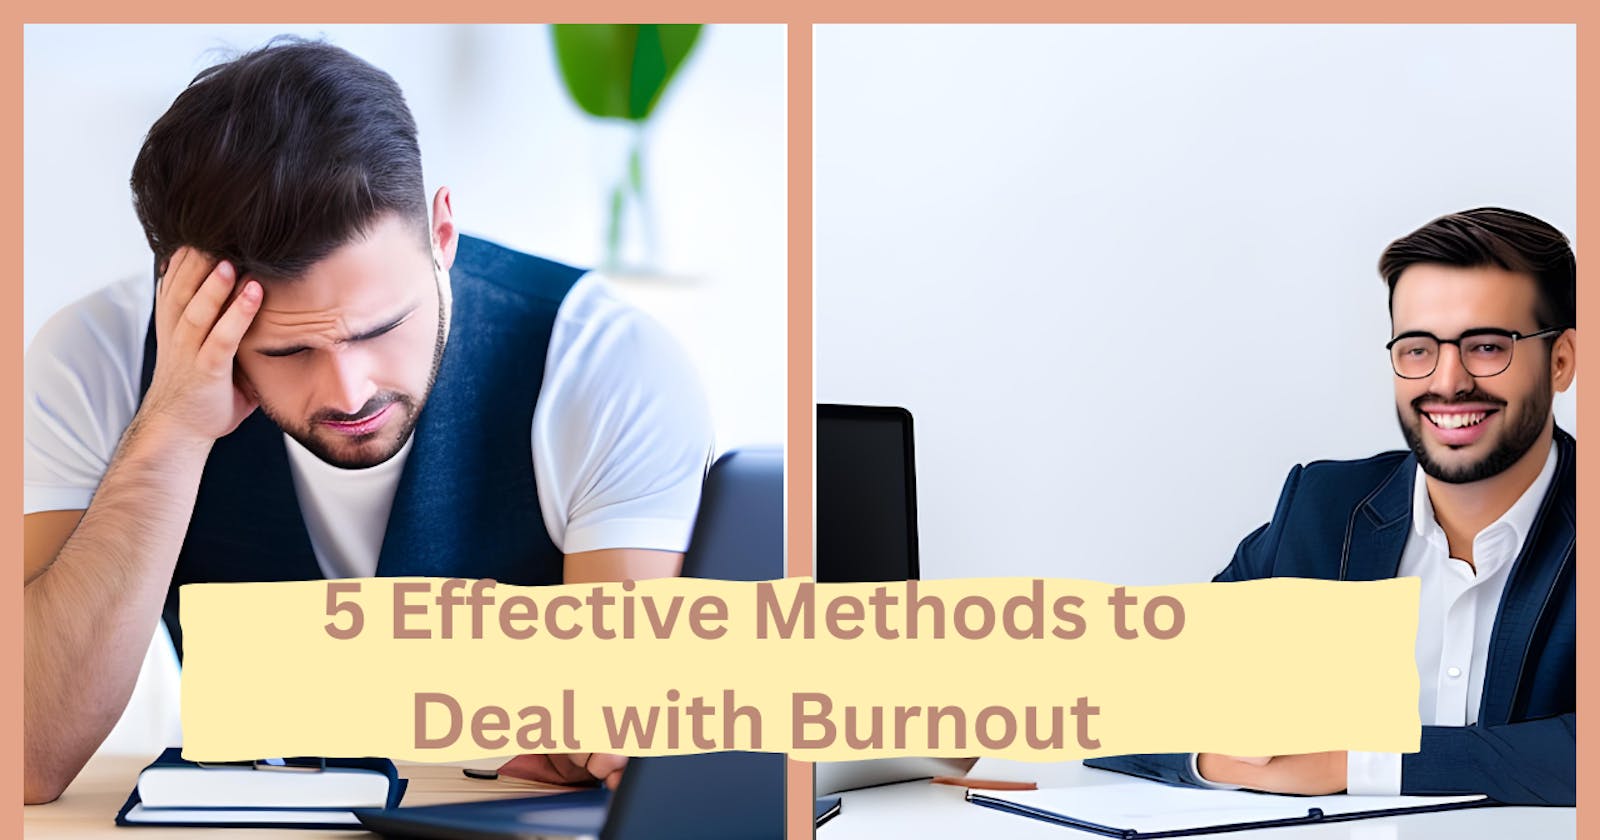 5 Effective Methods to Deal with Burnout